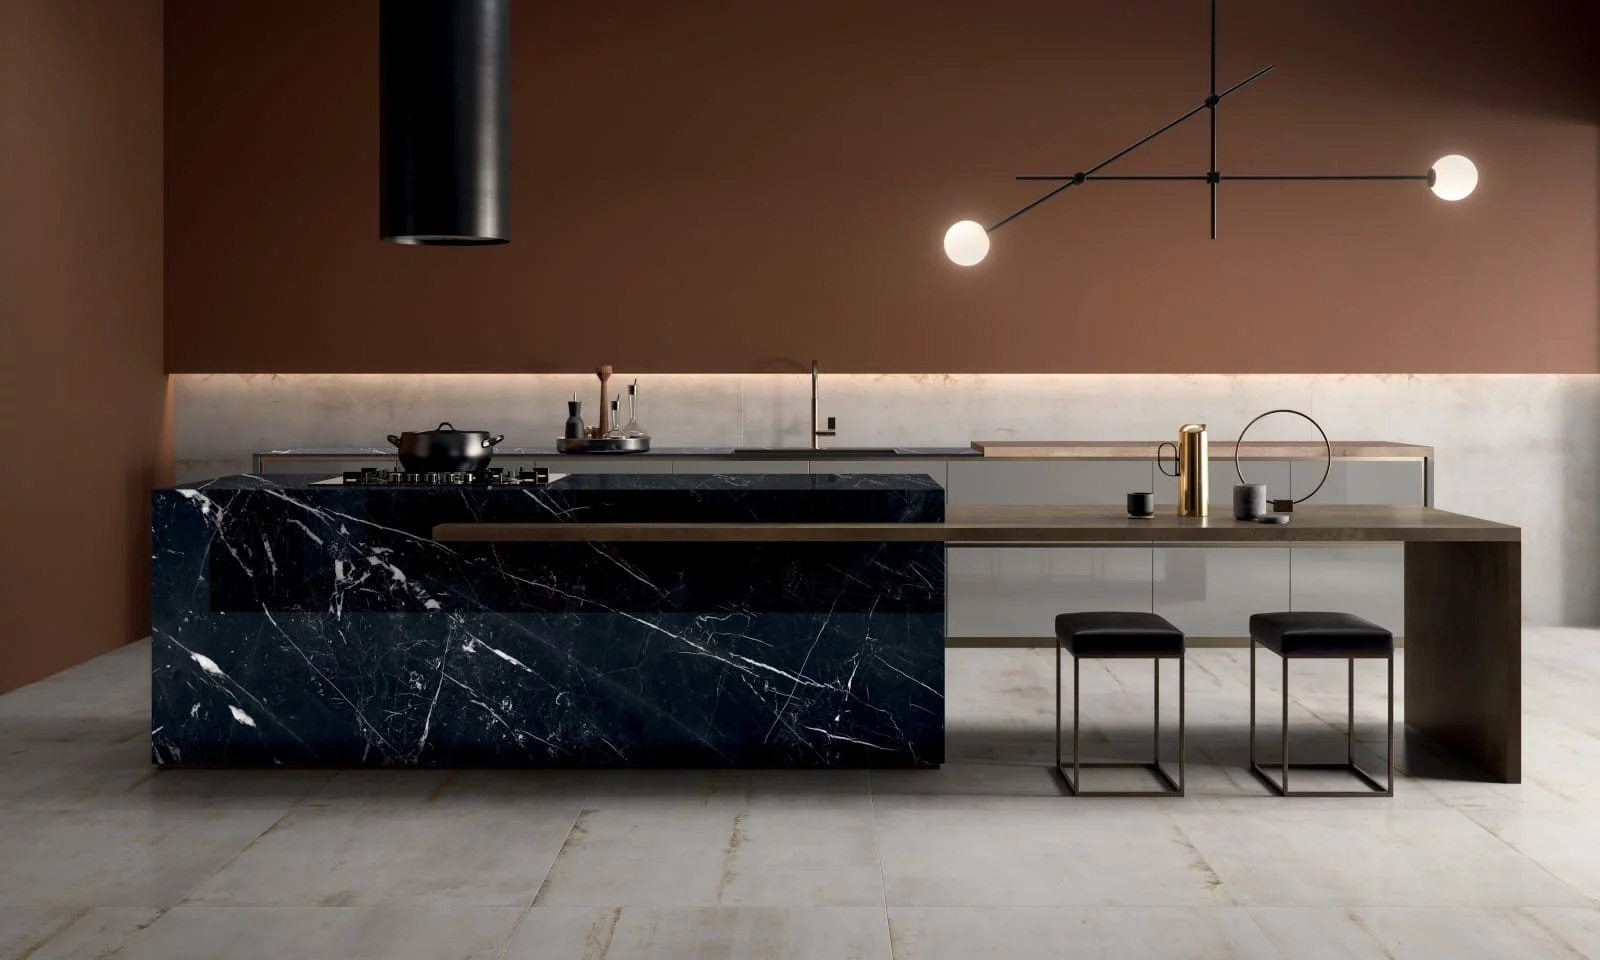 A shot of a modern kitchen with a beautiful center island clad in dark black porcelain slab with white veining.